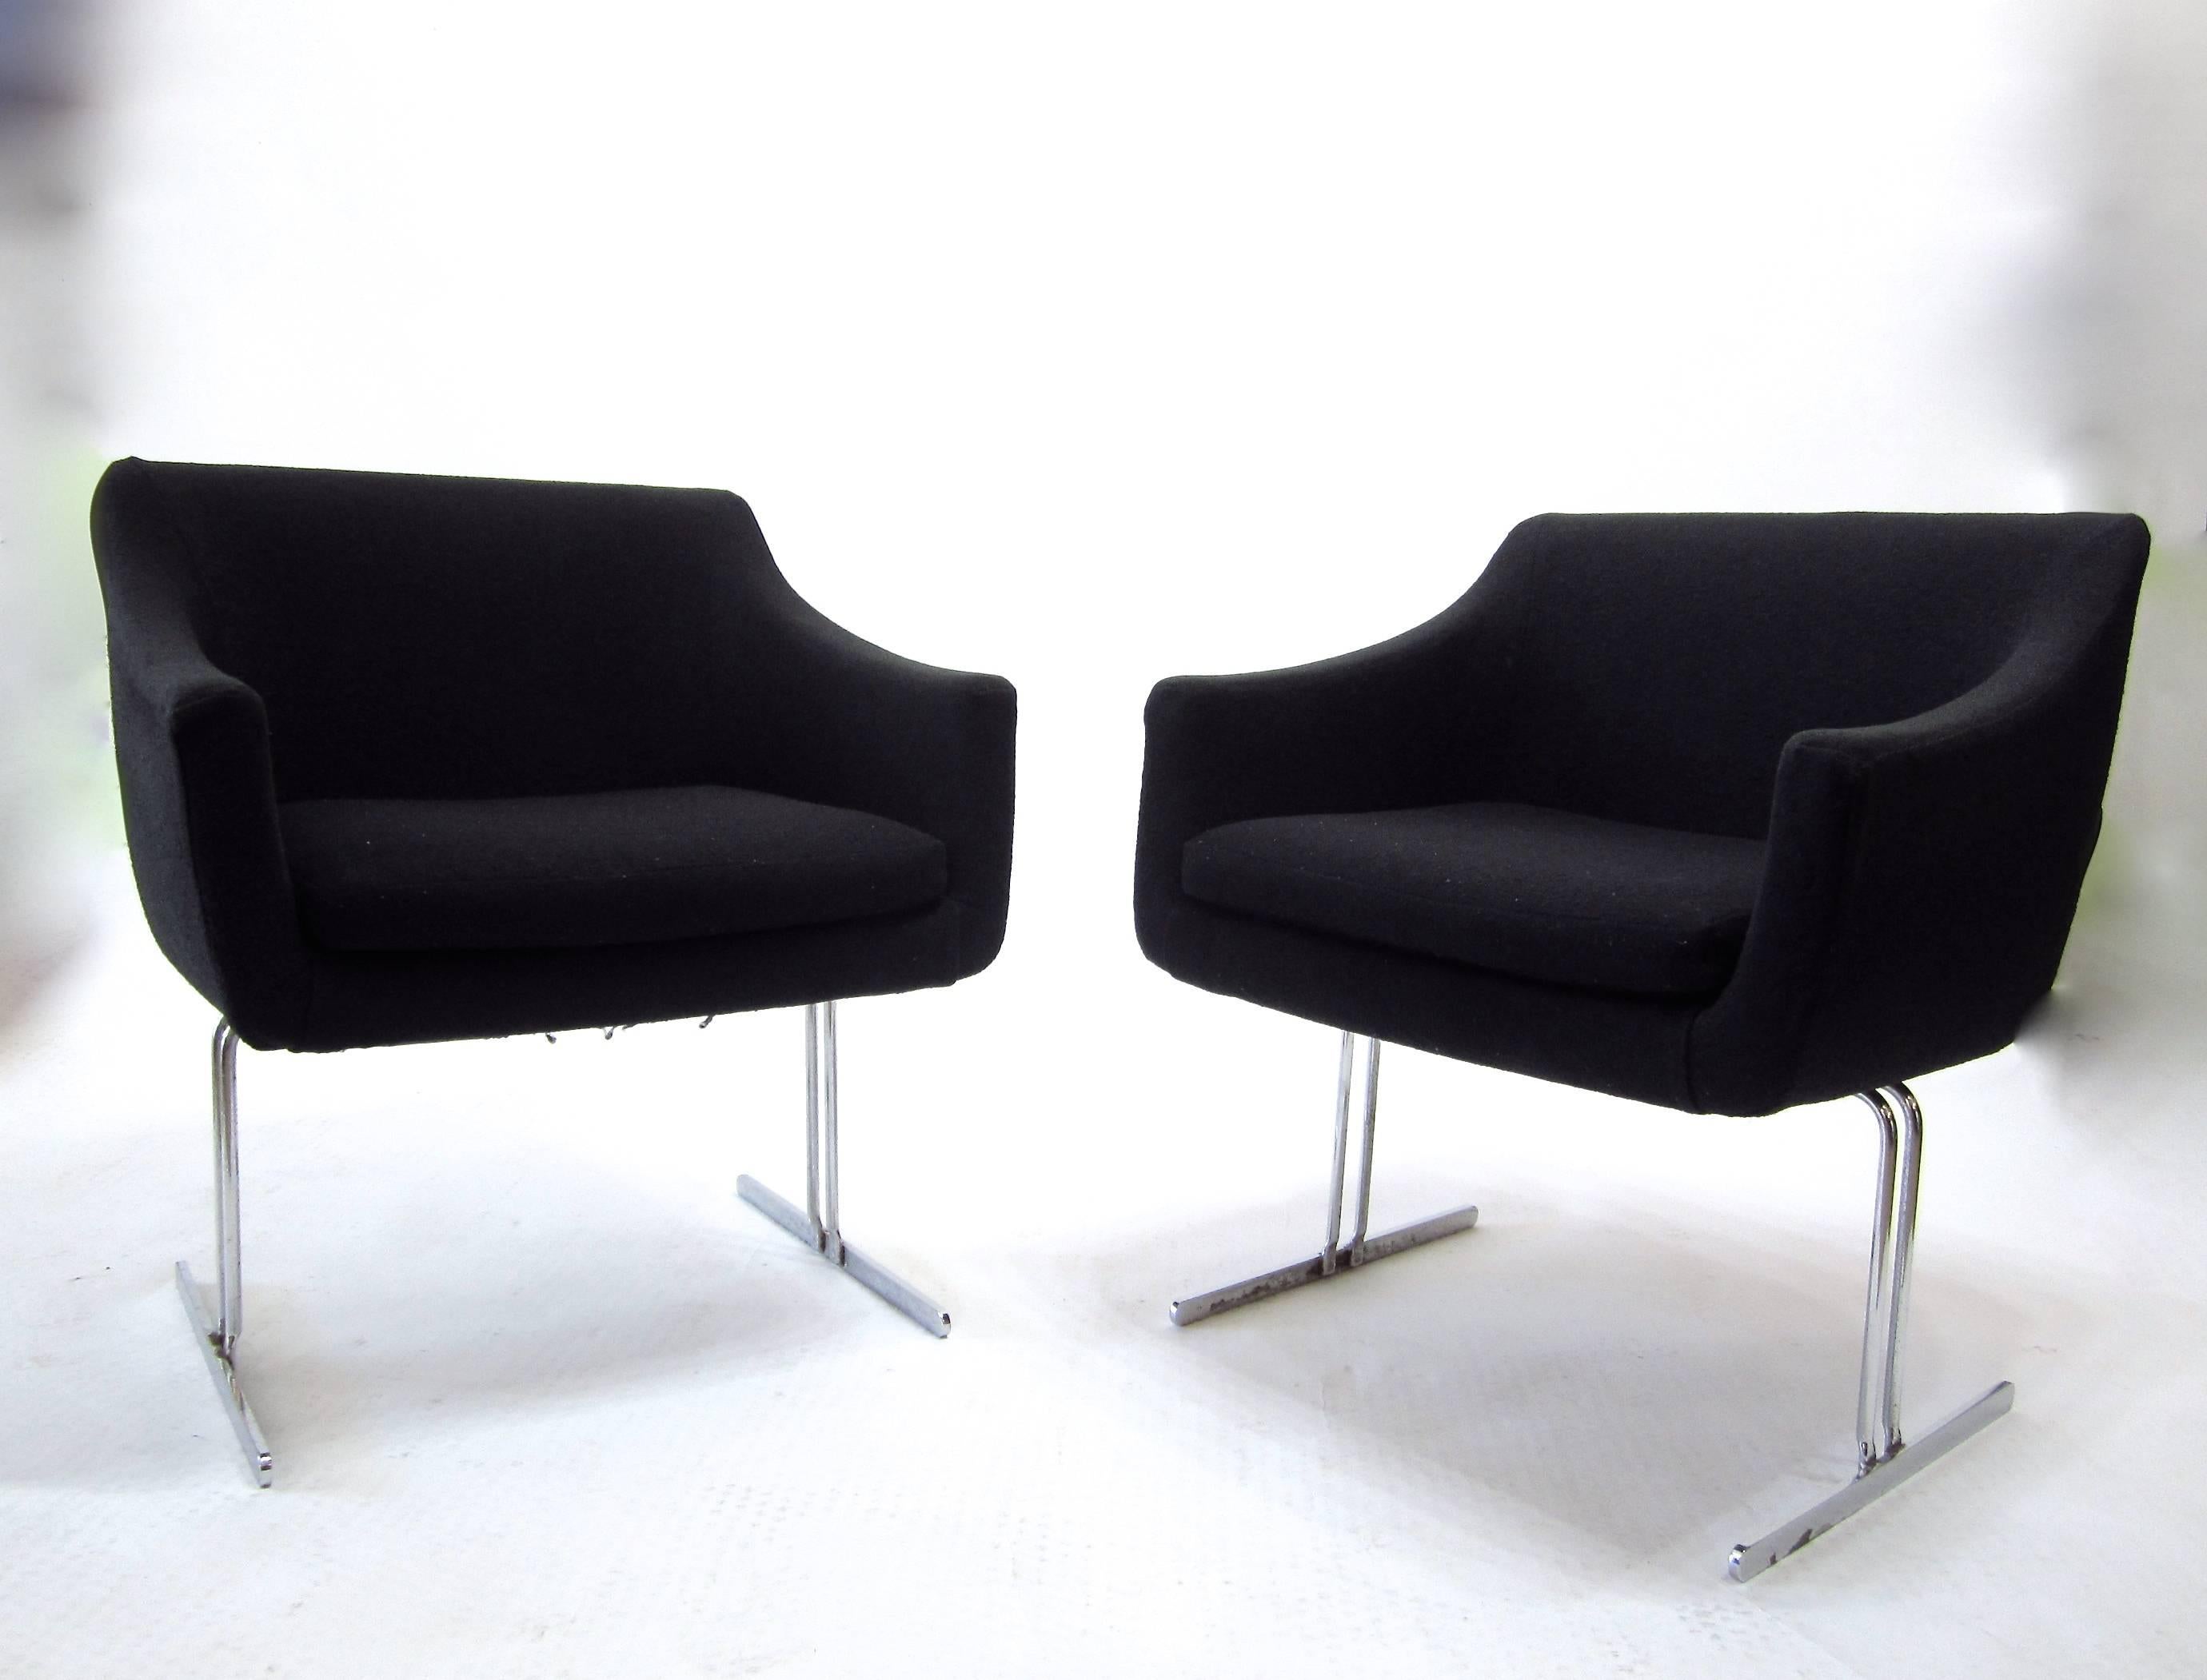 Pair of Hugh Acton Chrome Frame Lounge Chairs In Good Condition For Sale In Miami, FL